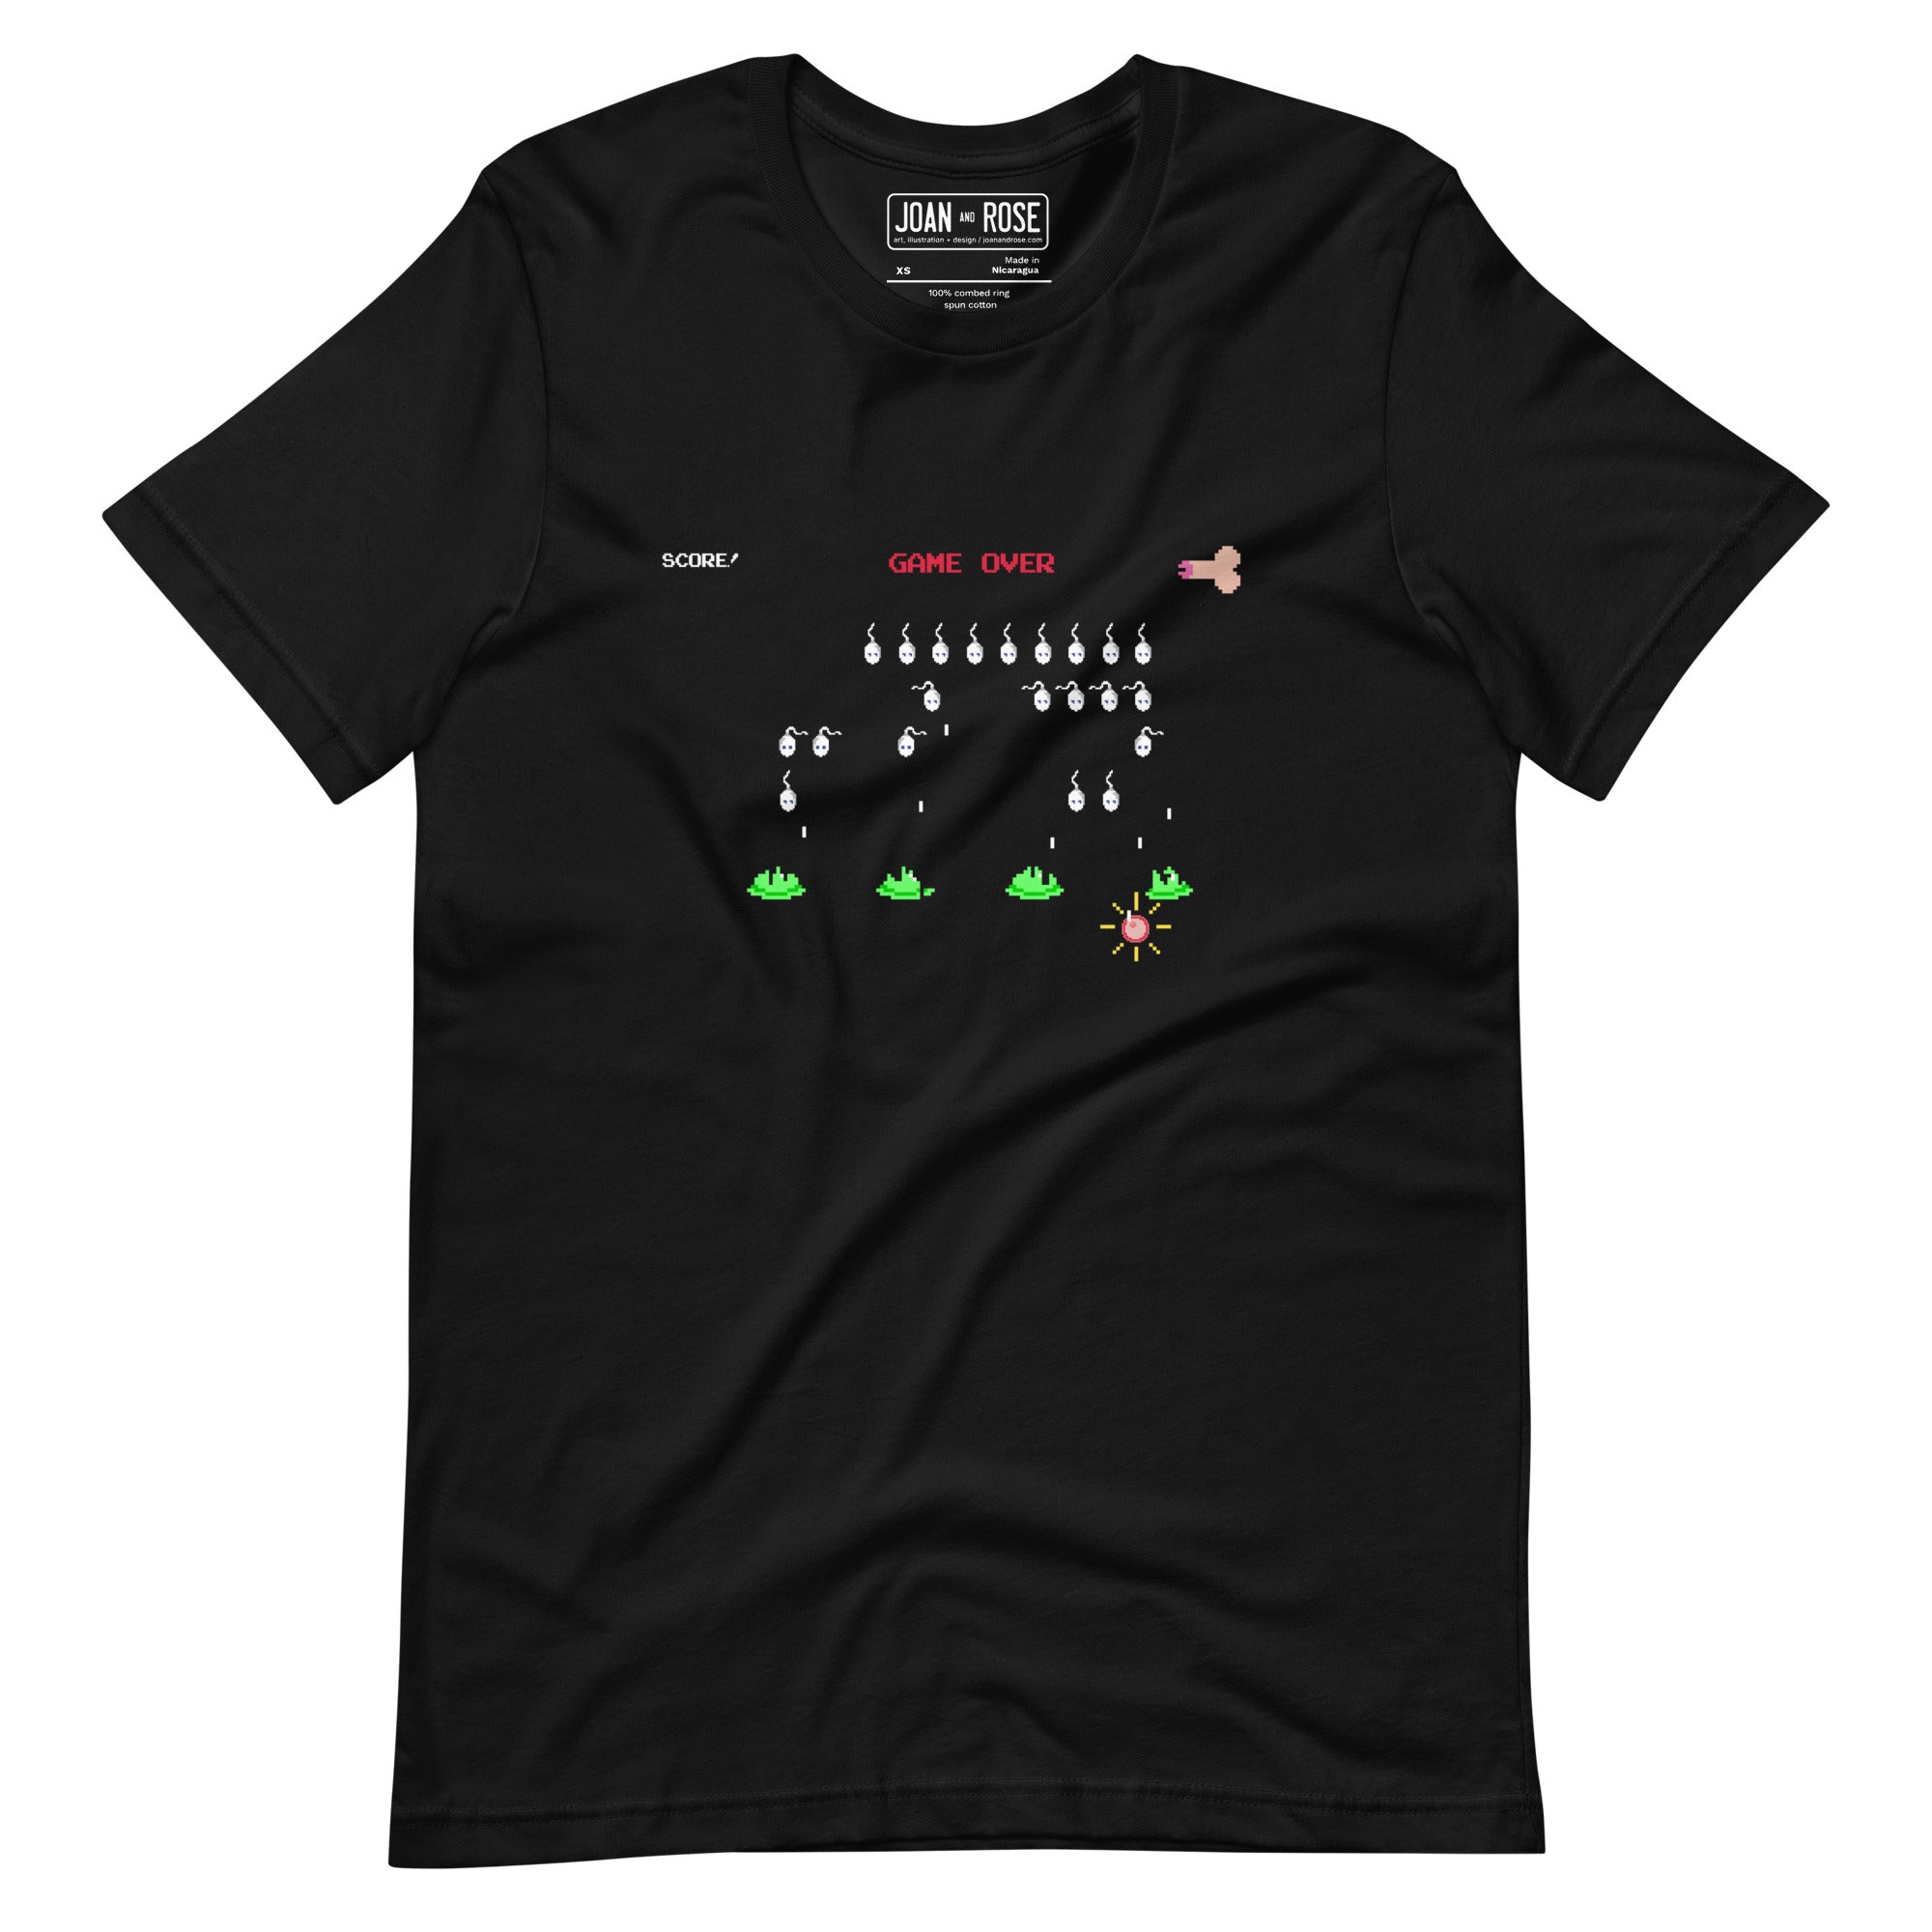 Black t-shirt with Space Invaders parody illustration in the style of an 8 bit graphic. A penis spaceship fires sperms (aliens) who fire downward towards a human egg. A sperm has hit the egg and the text Game Over appears over the image